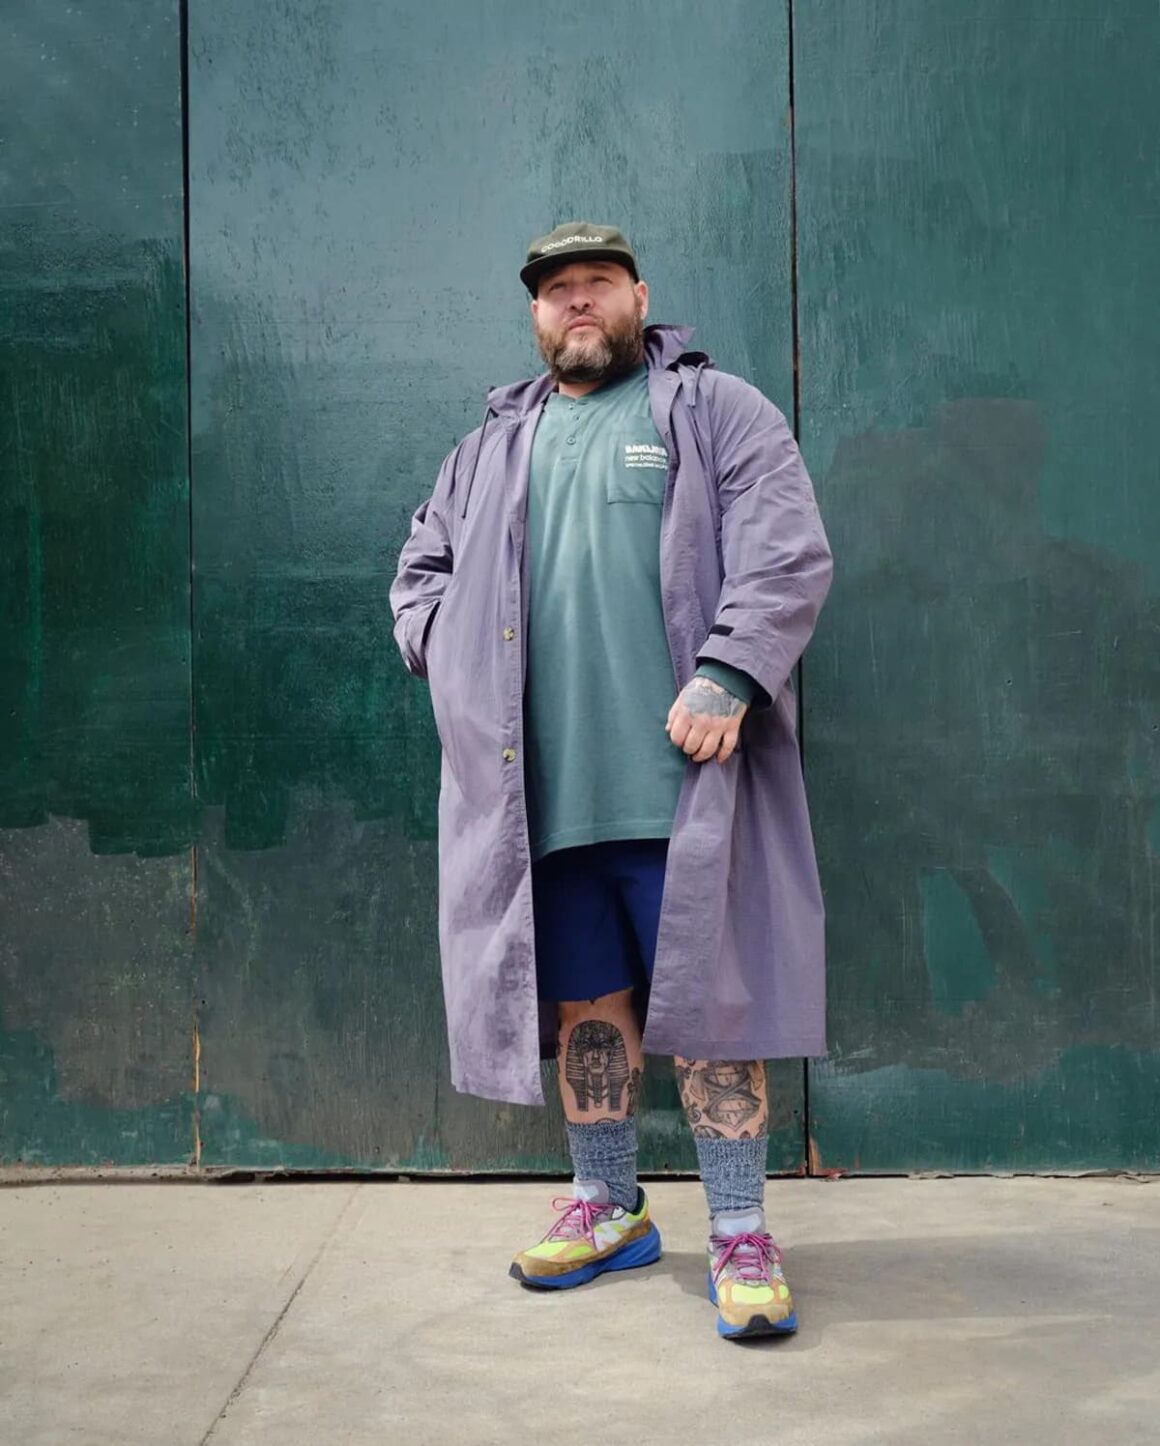 Action Bronson x New Balance 990v6 M990AB6 Outfit on Feet